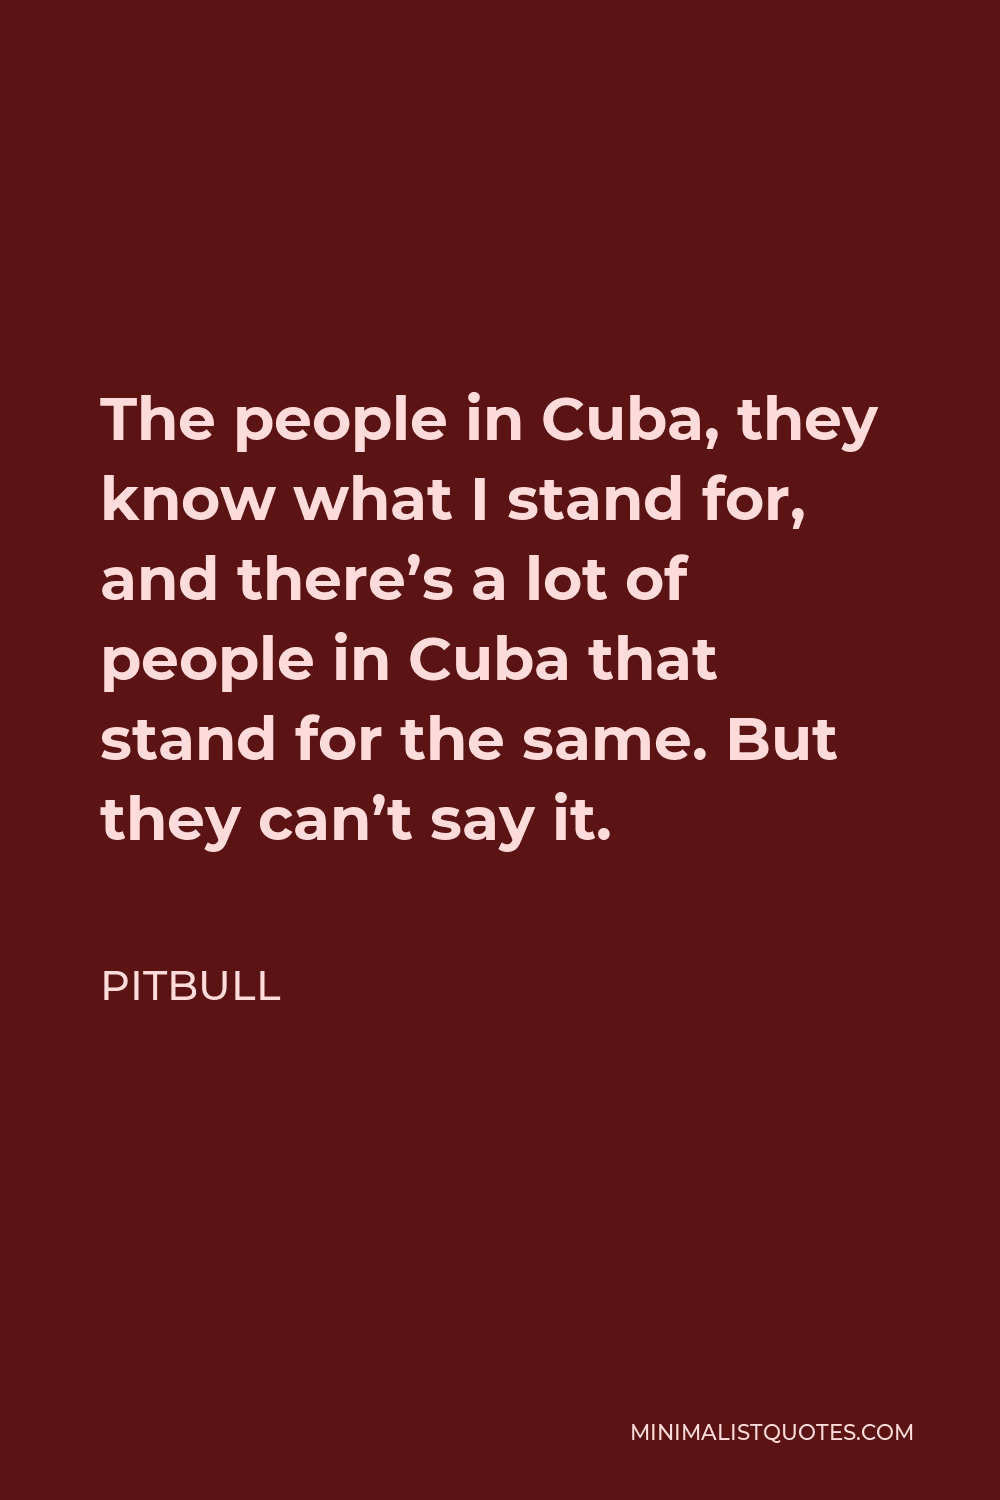 Pitbull Quote - The people in Cuba, they know what I stand for, and there’s a lot of people in Cuba that stand for the same. But they can’t say it.